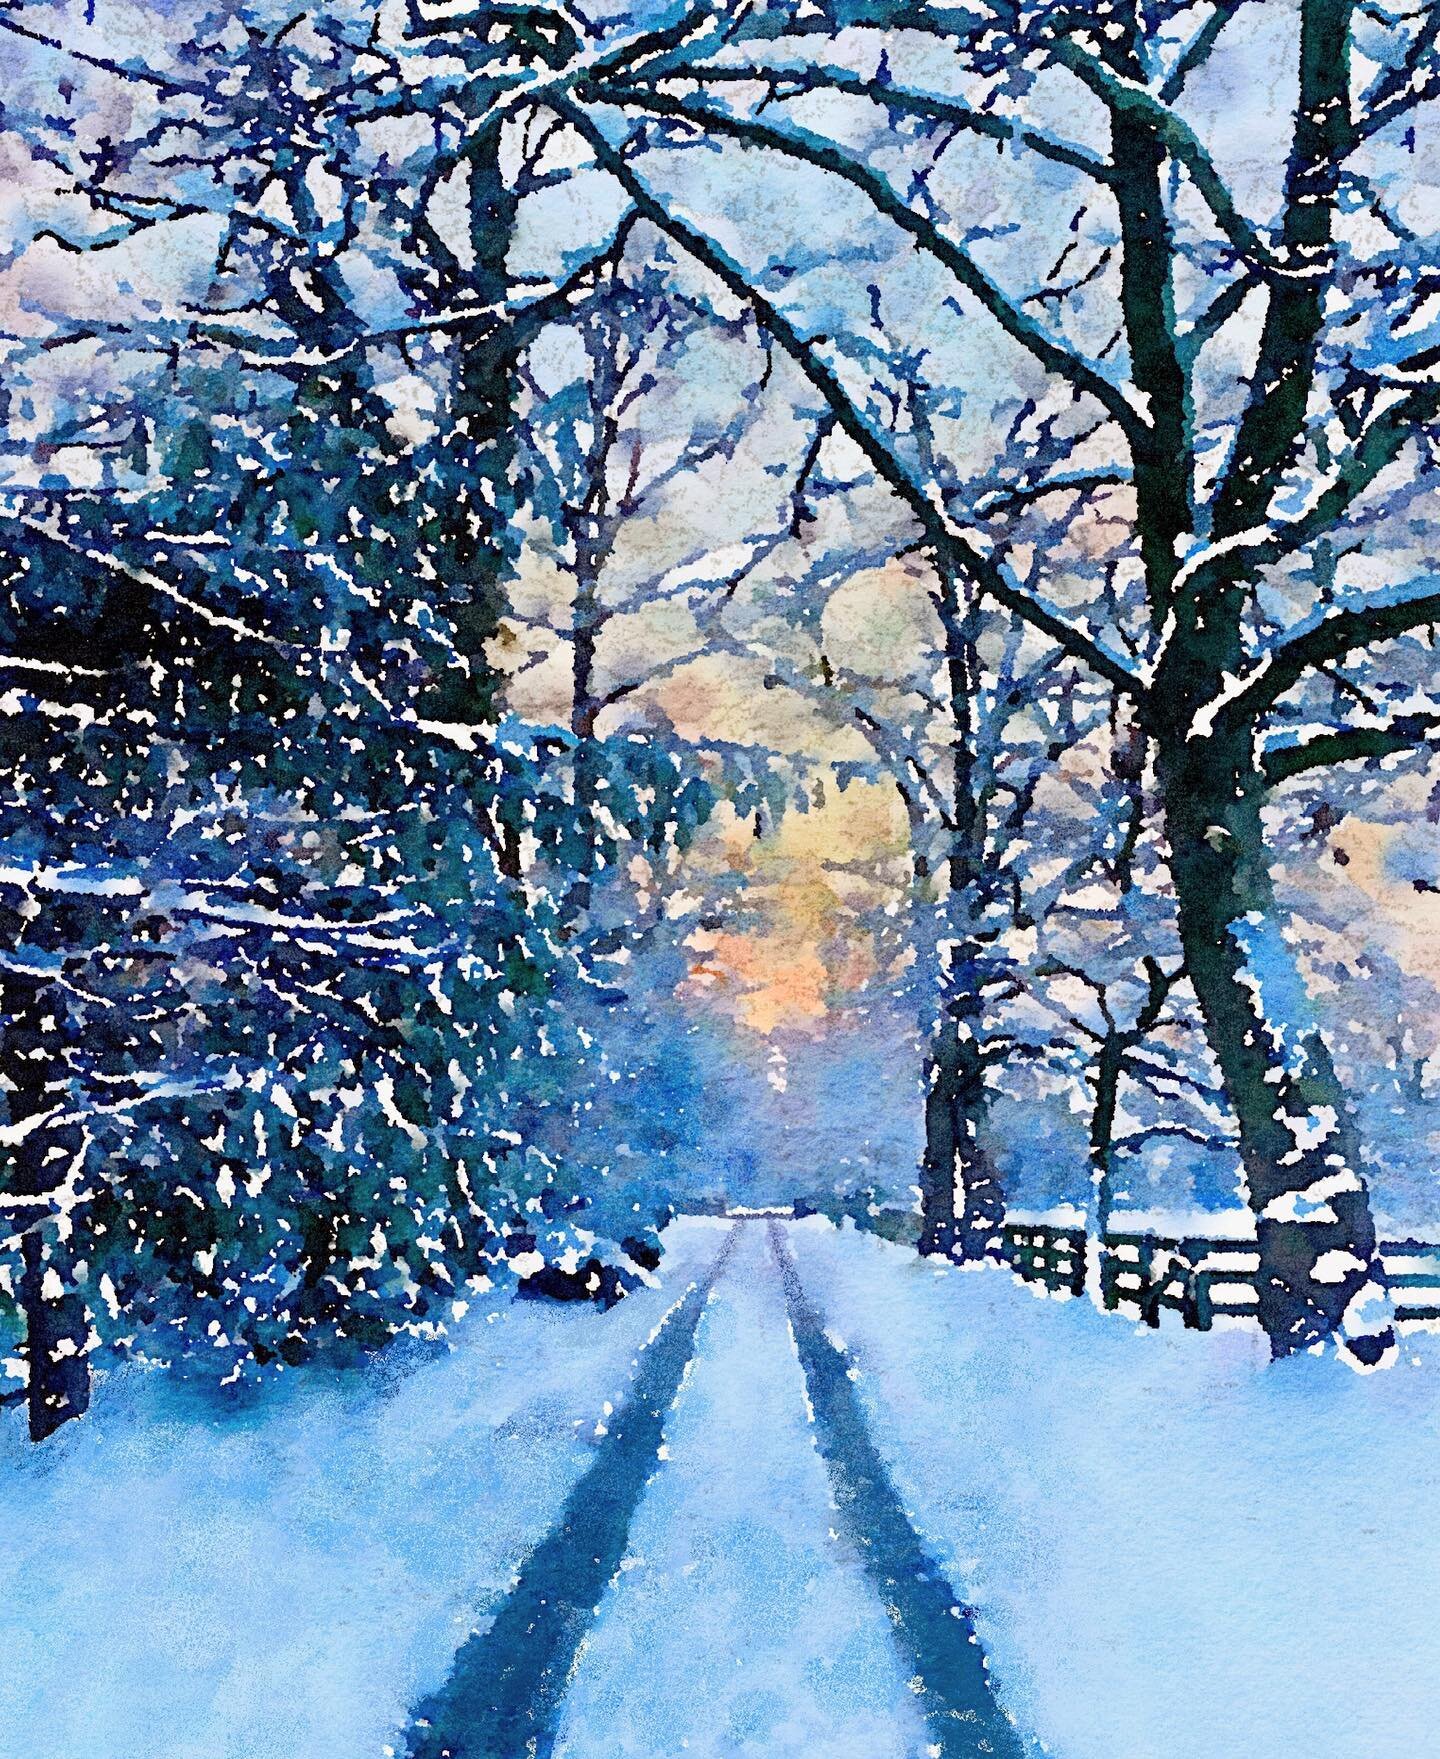 The kids ran out the door before 730am this morning to greet our first snow of the season. 

I excitedly went with them. 

The farm is magical in the snow. I caught the sun peeking through the clouds on the driveway.

I edited my original photo to lo